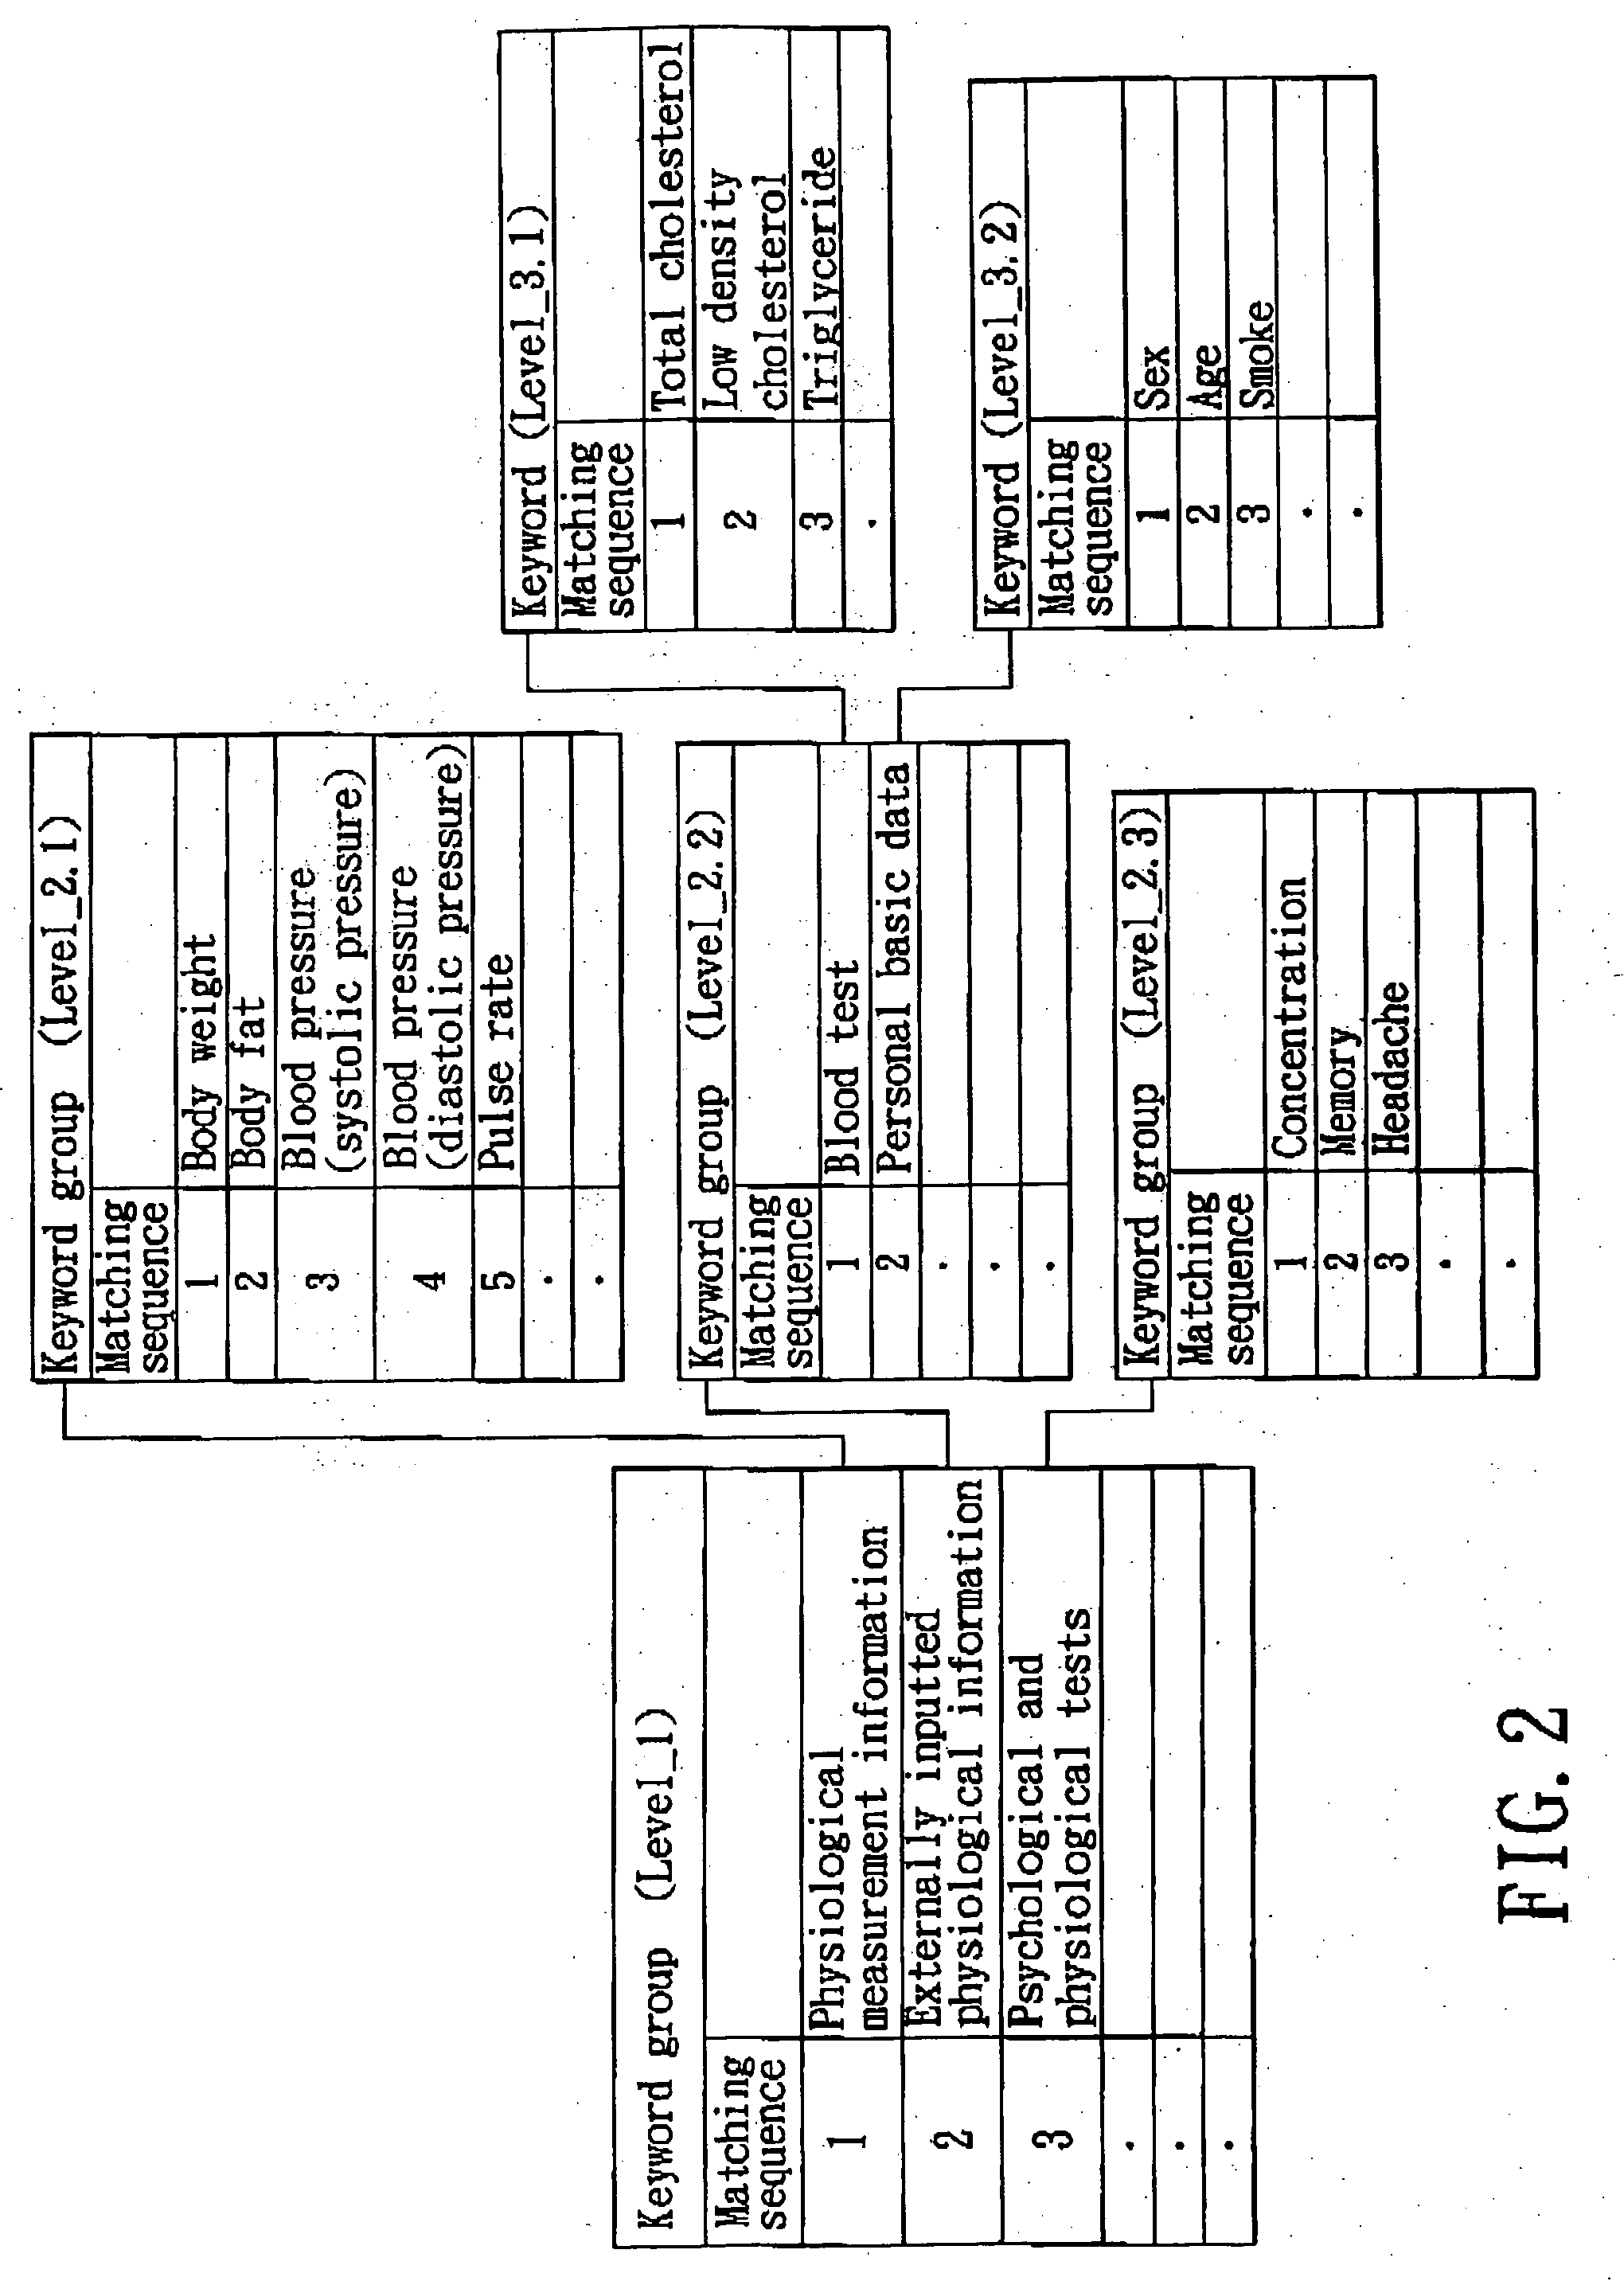 System for cross-acquisition of physiological and psychological information